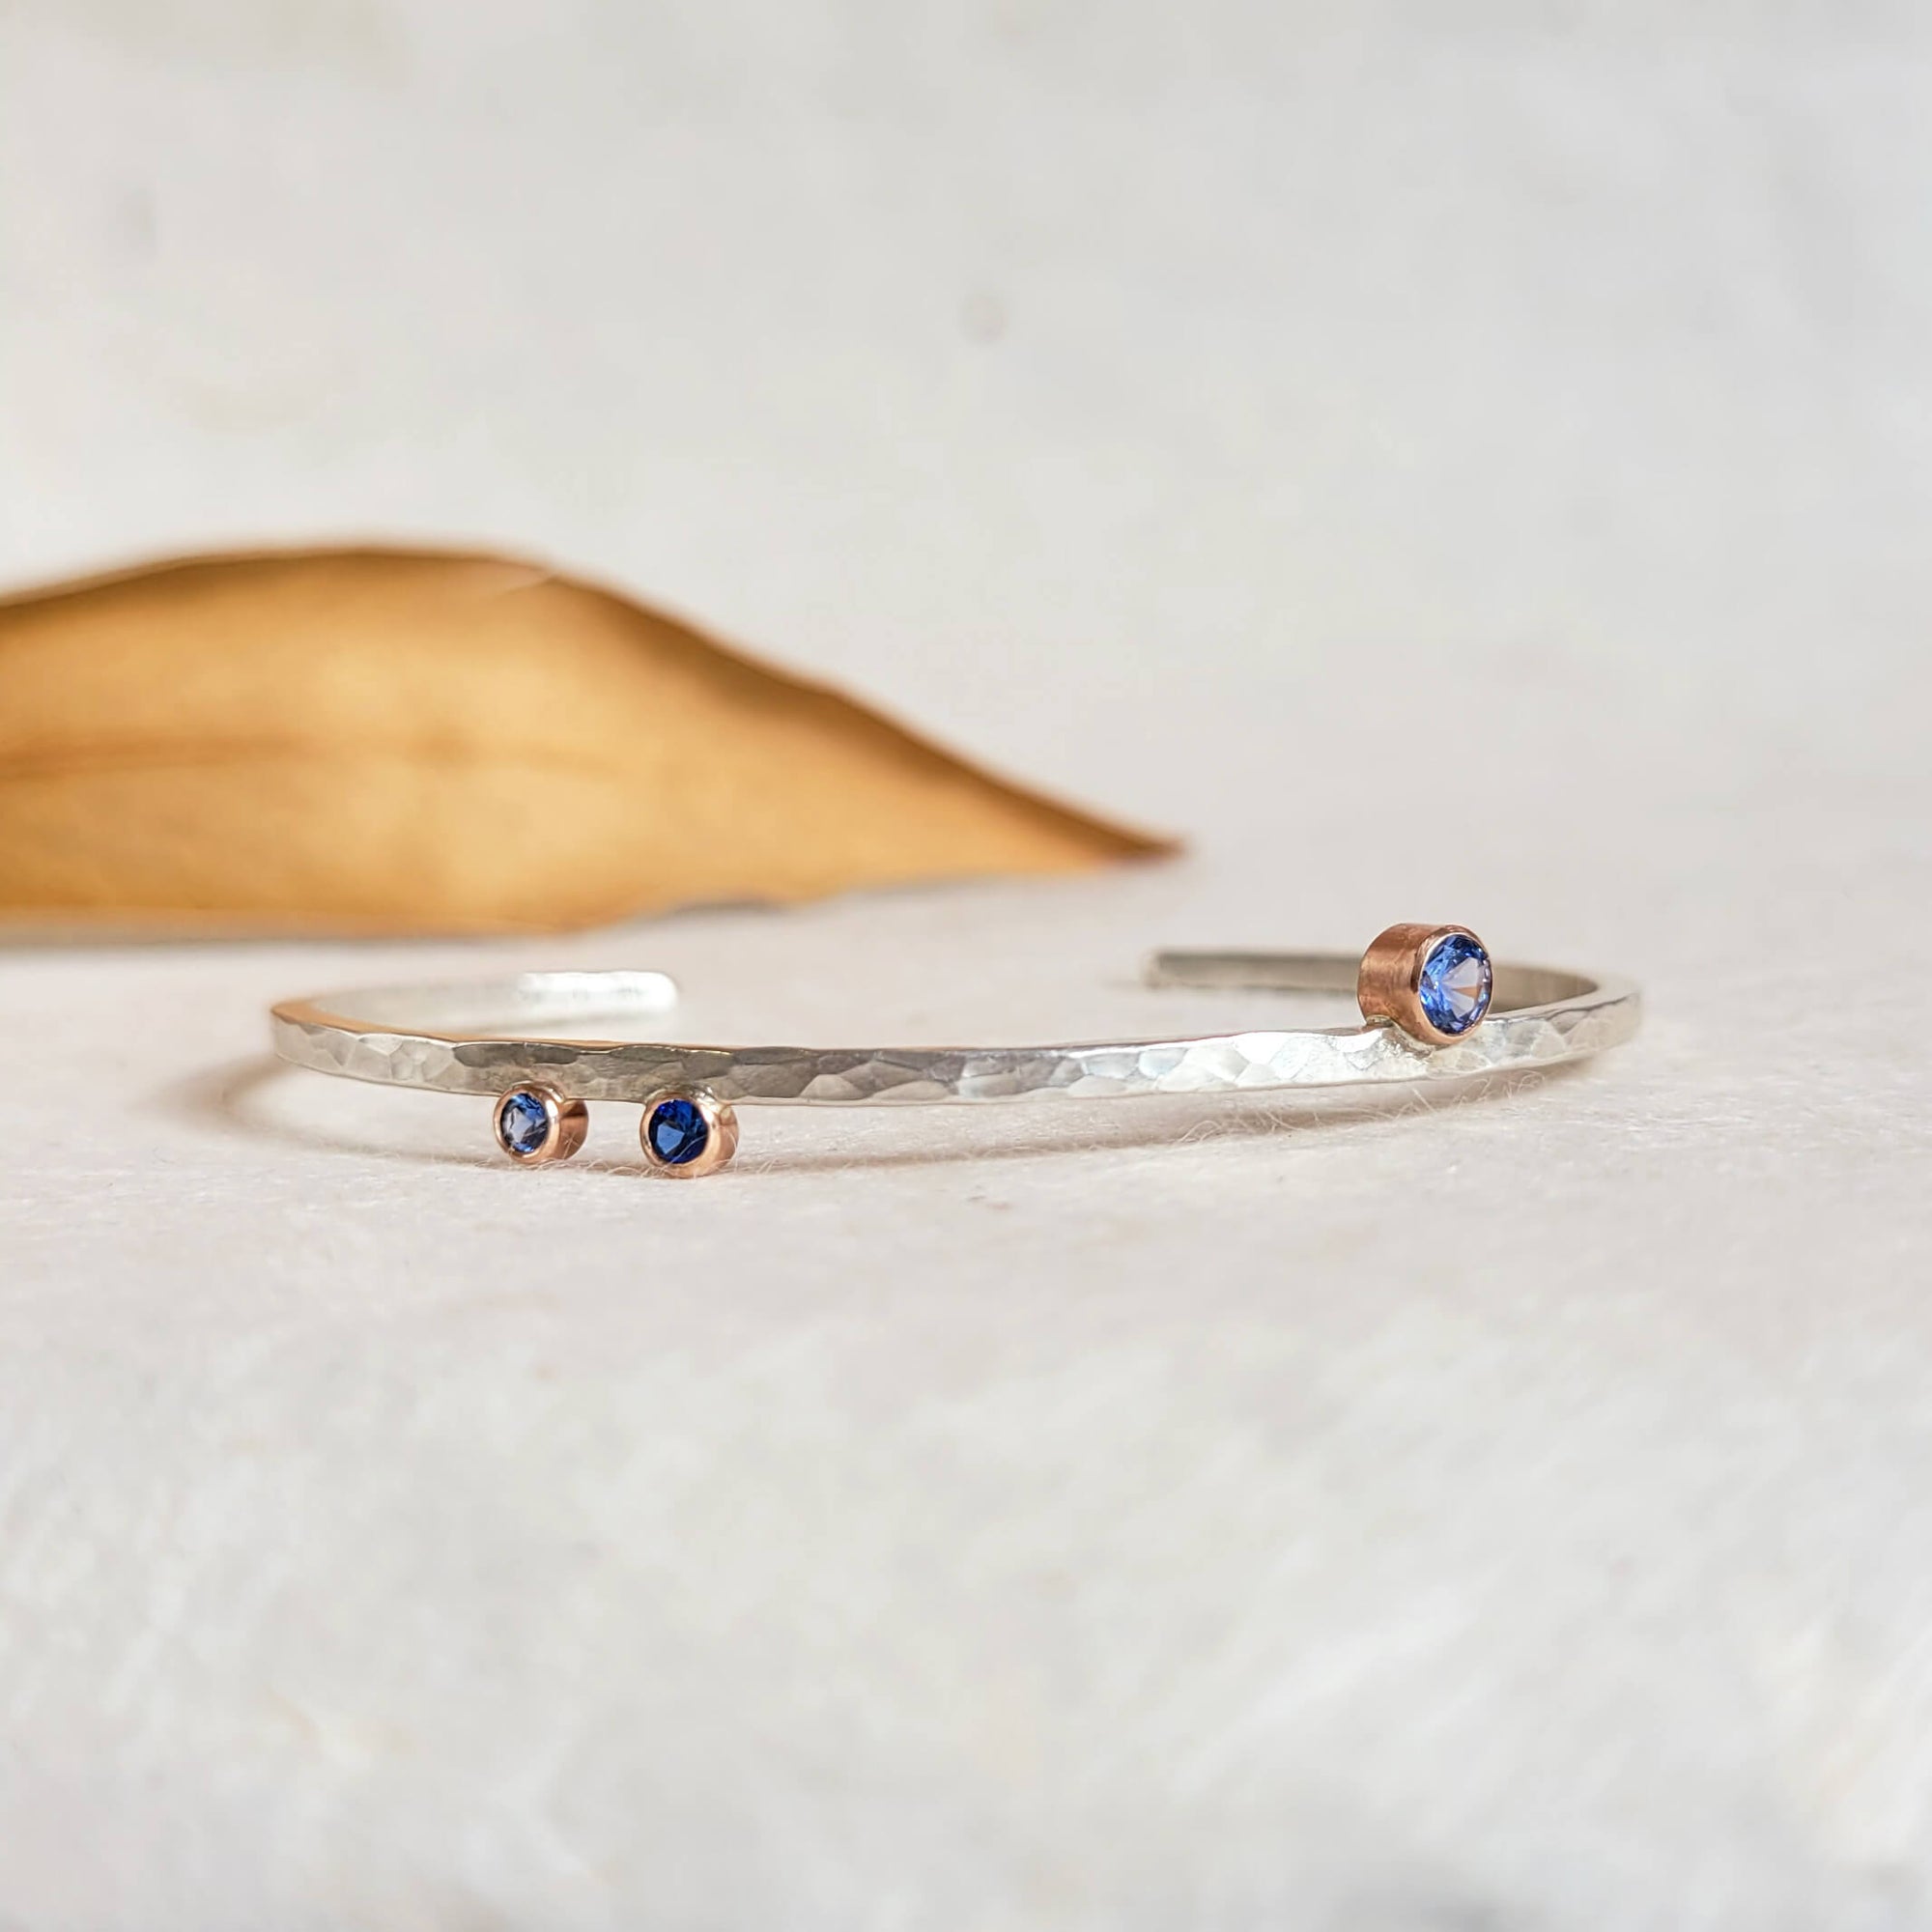 Brilliant Blue Sapphire Cuff Bracelet in Hammered Sterling Silver and Rose Gold